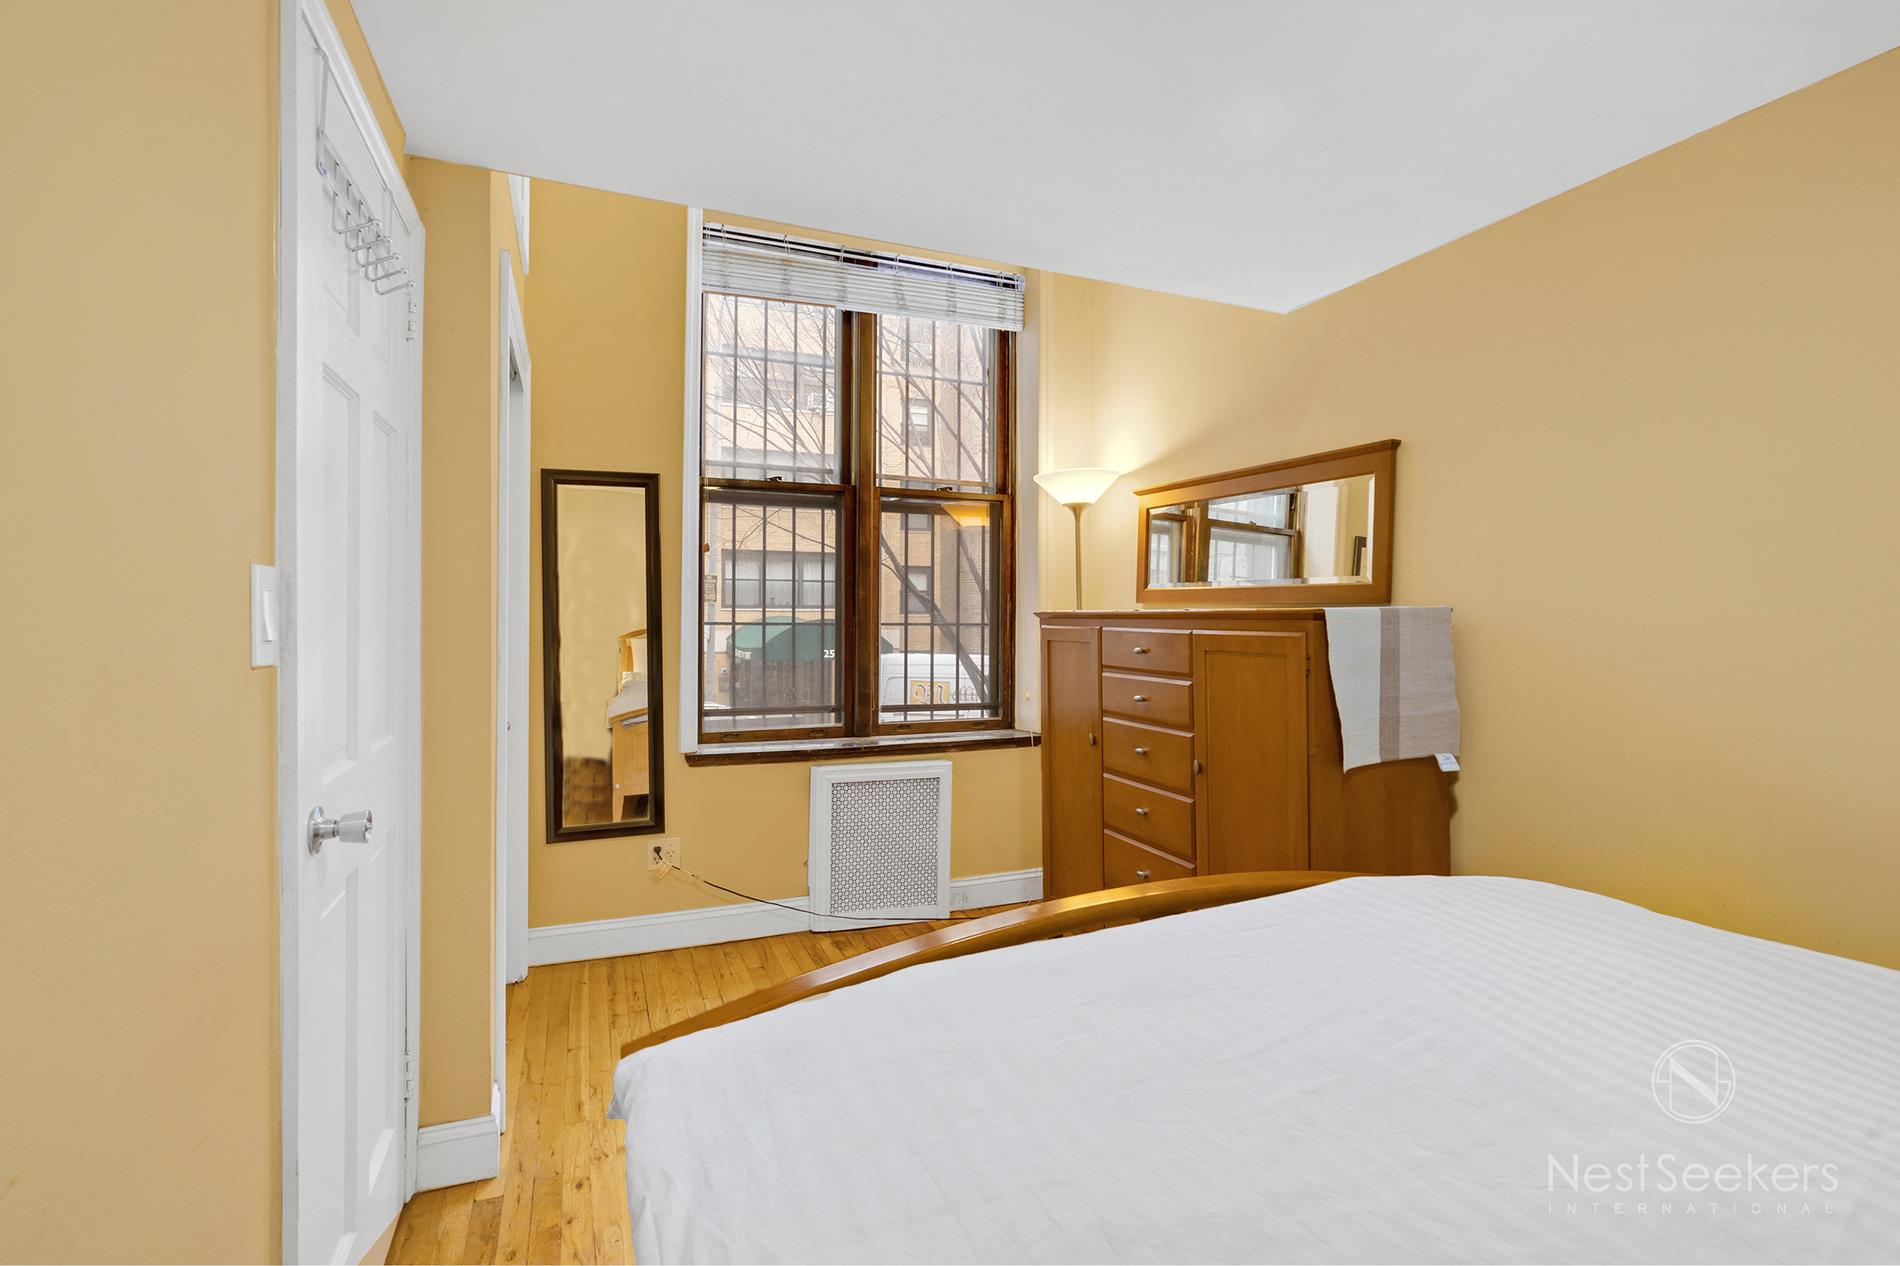 252 West 74th Street, New York City NY 10023 A.N Shell Realty